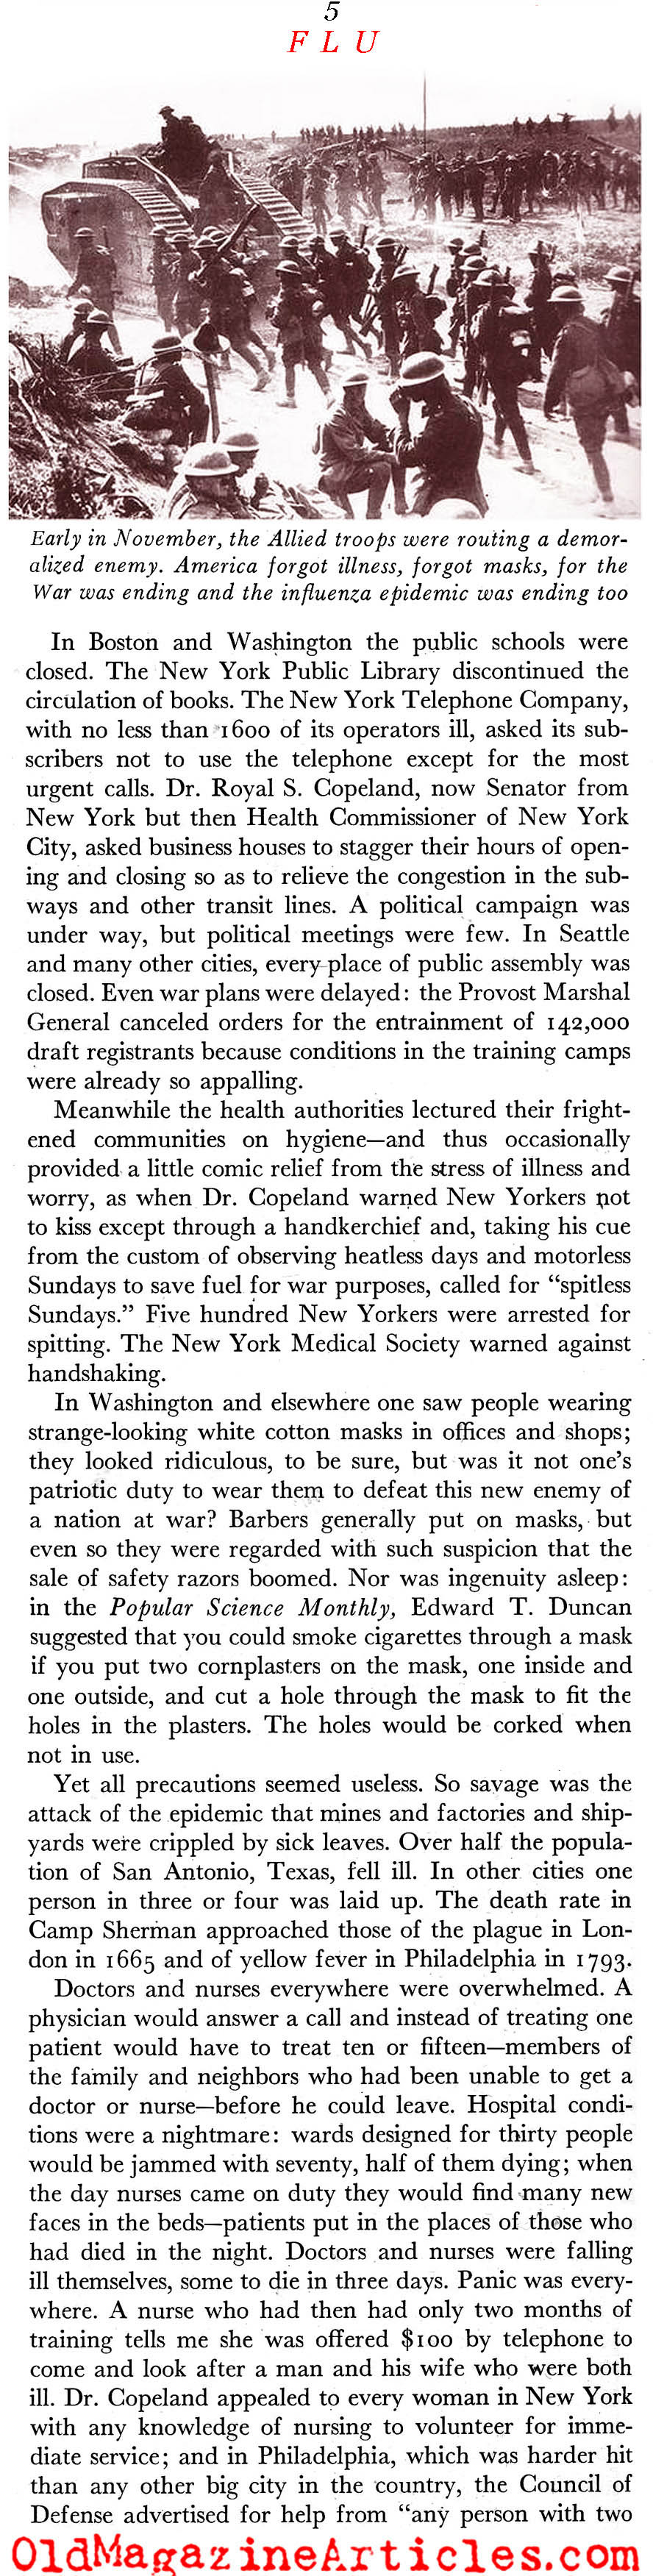 The Pandemic of 1918 (Scribner's Magazine, 1938)